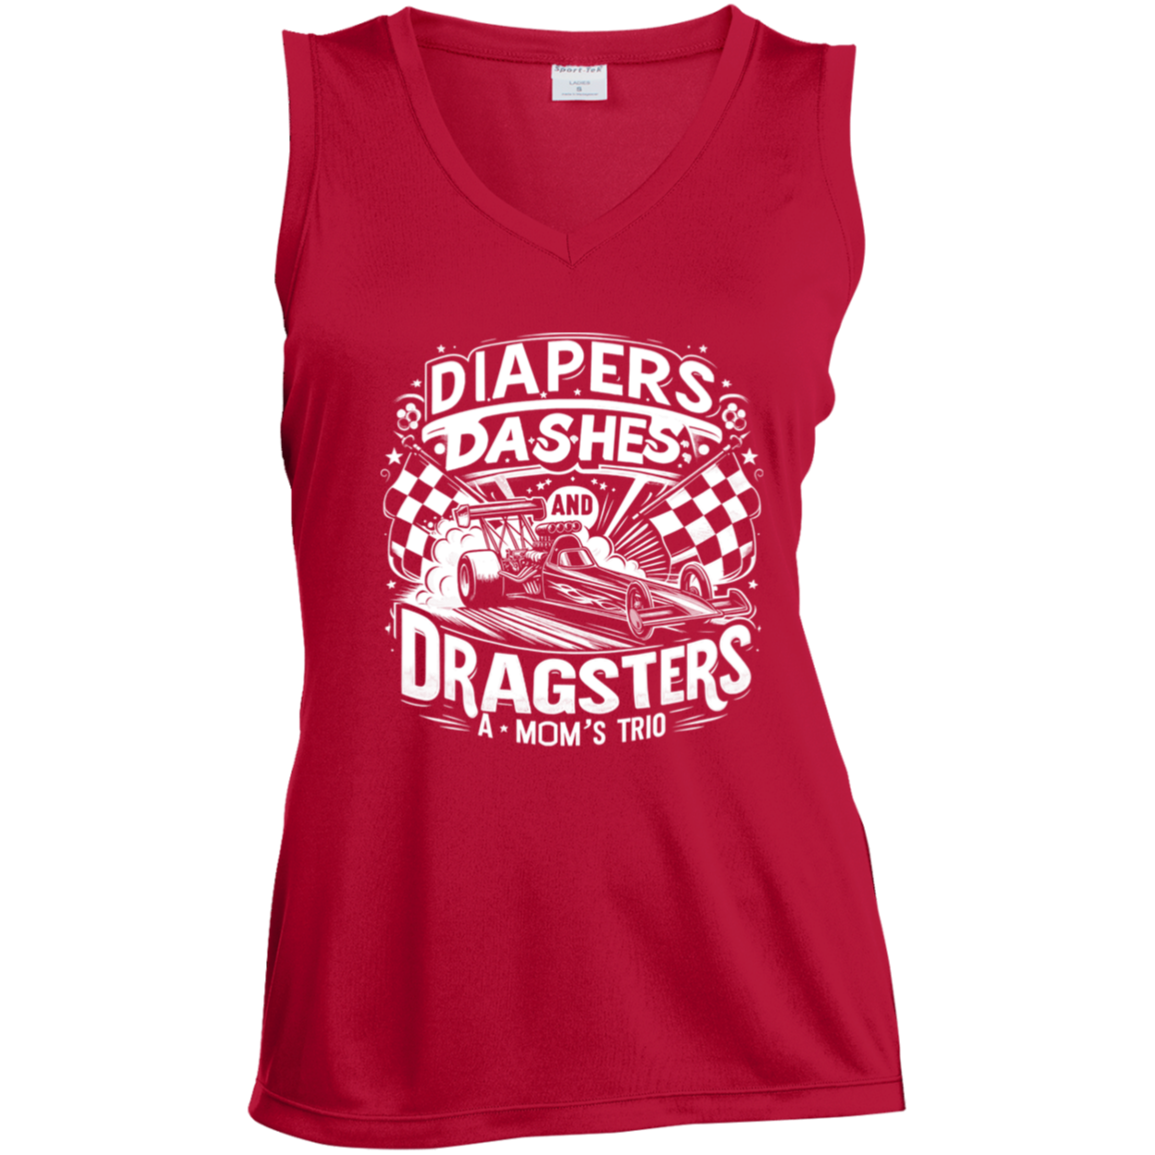 Diapers Dashes And Dragsters A Mom's Trio Tank Tops